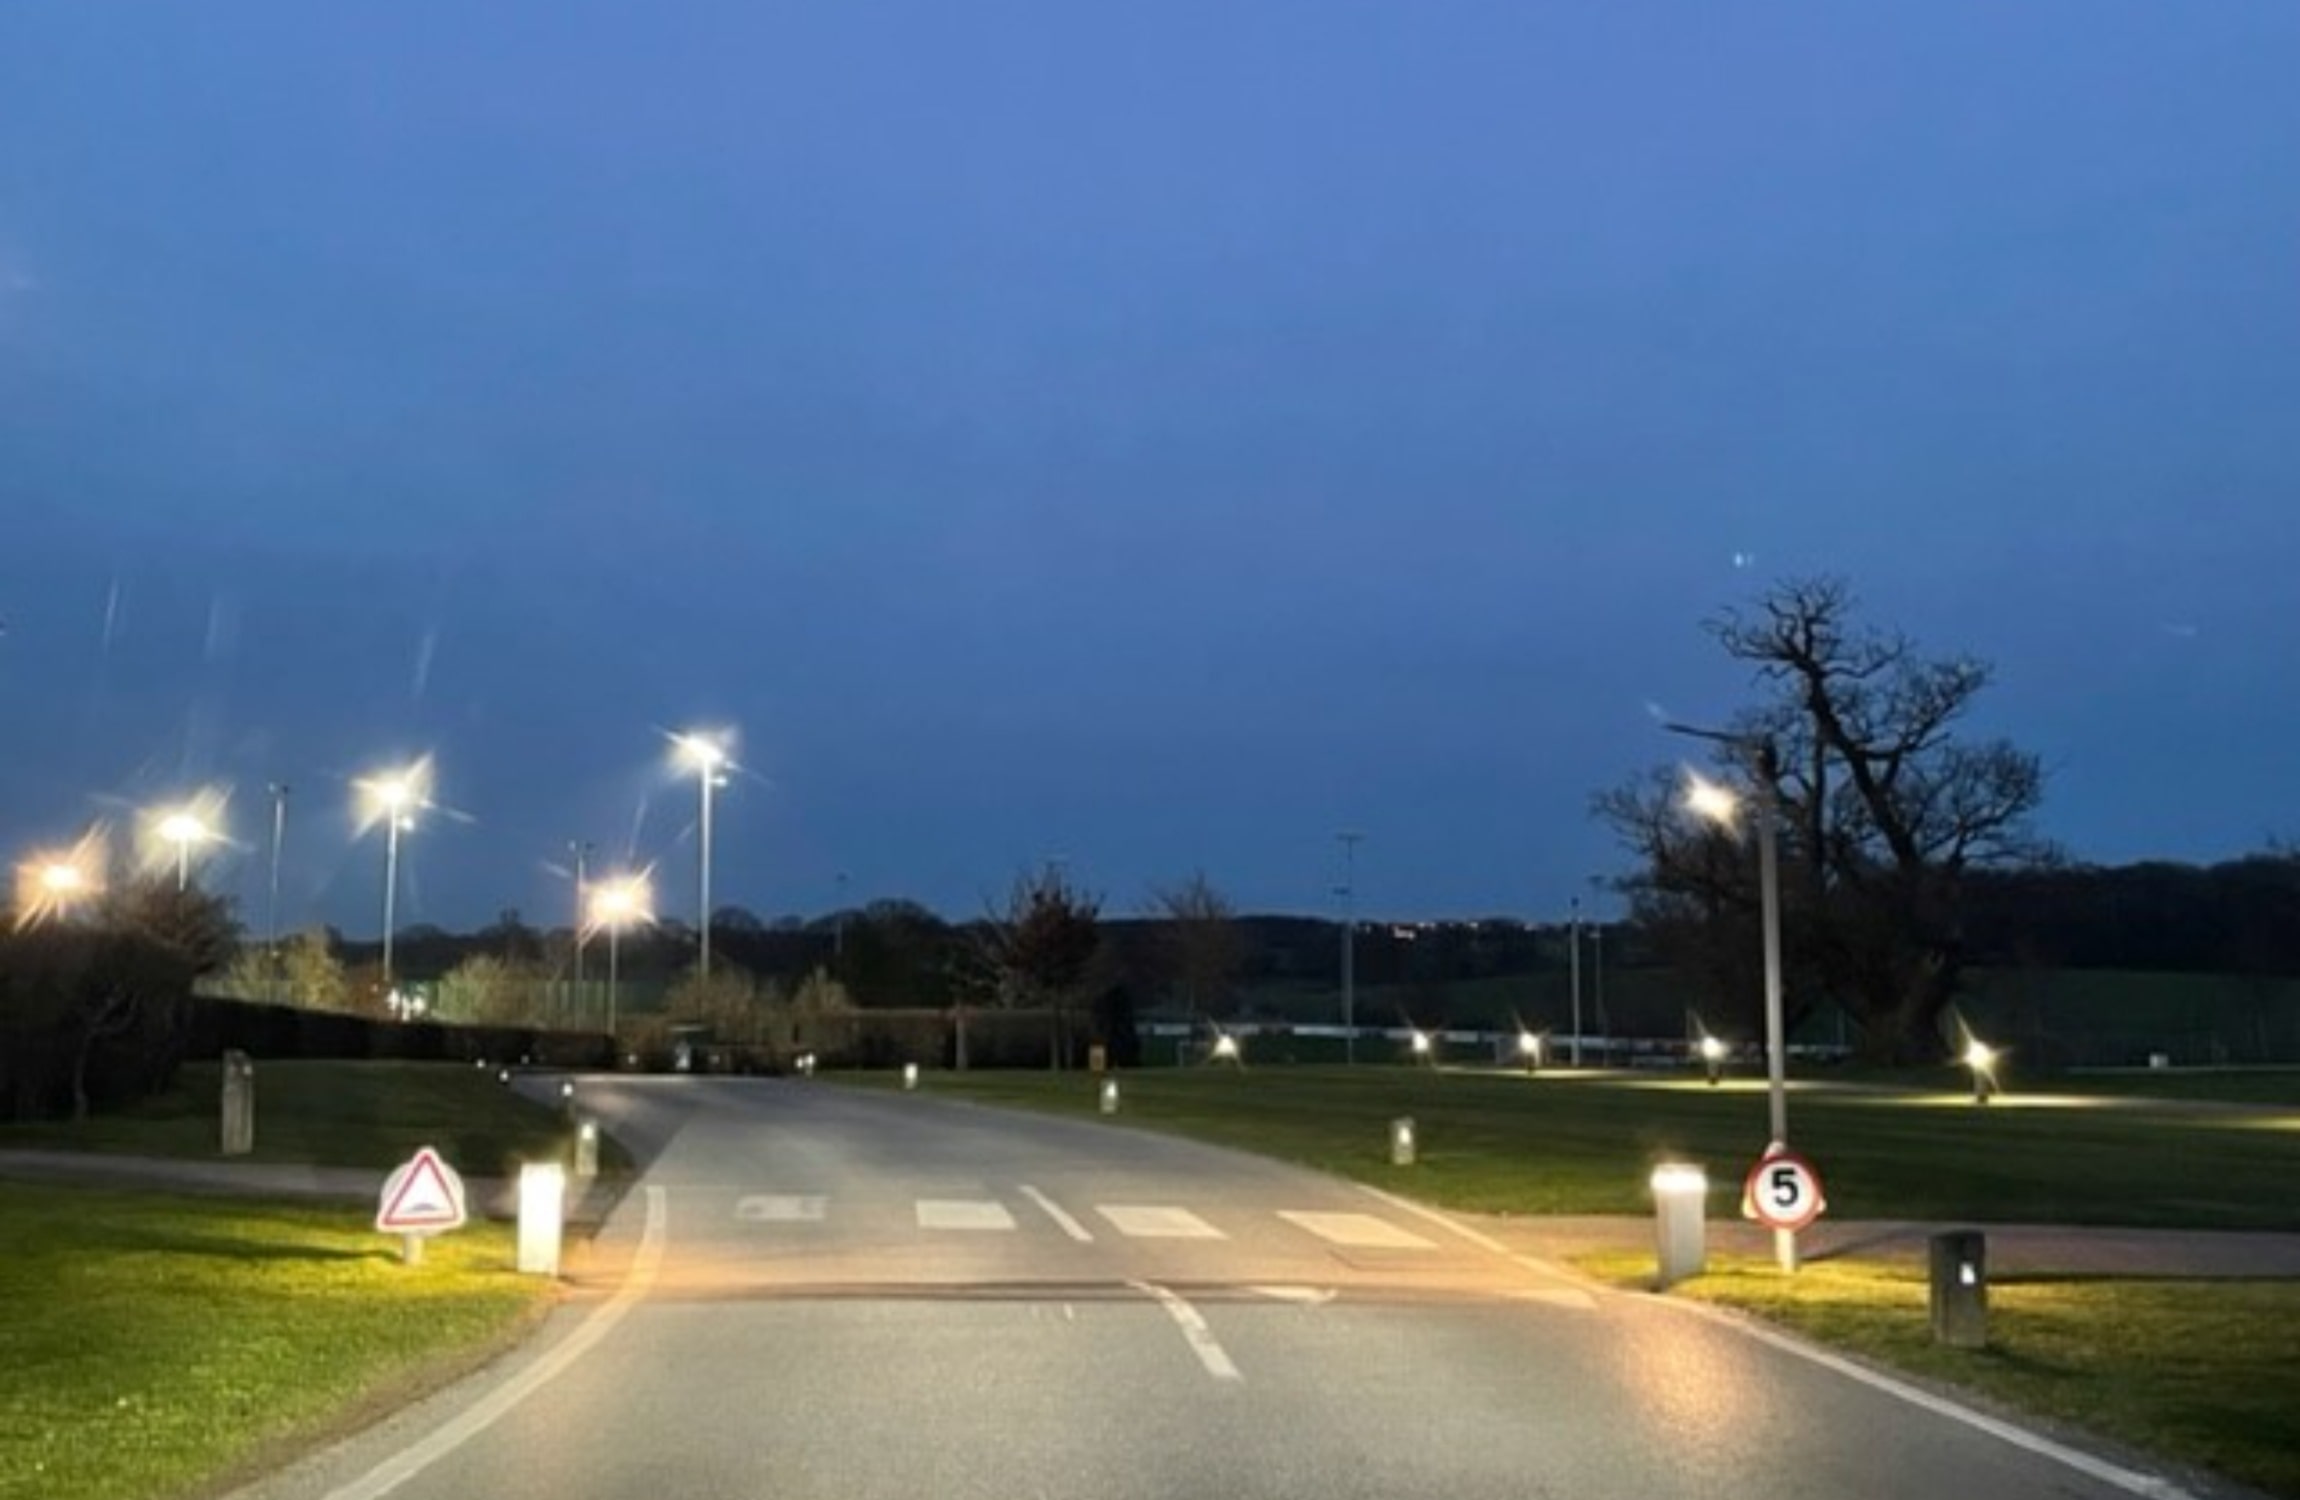 A well lit road at St. George's Park at Night with a pedestrian crossing.